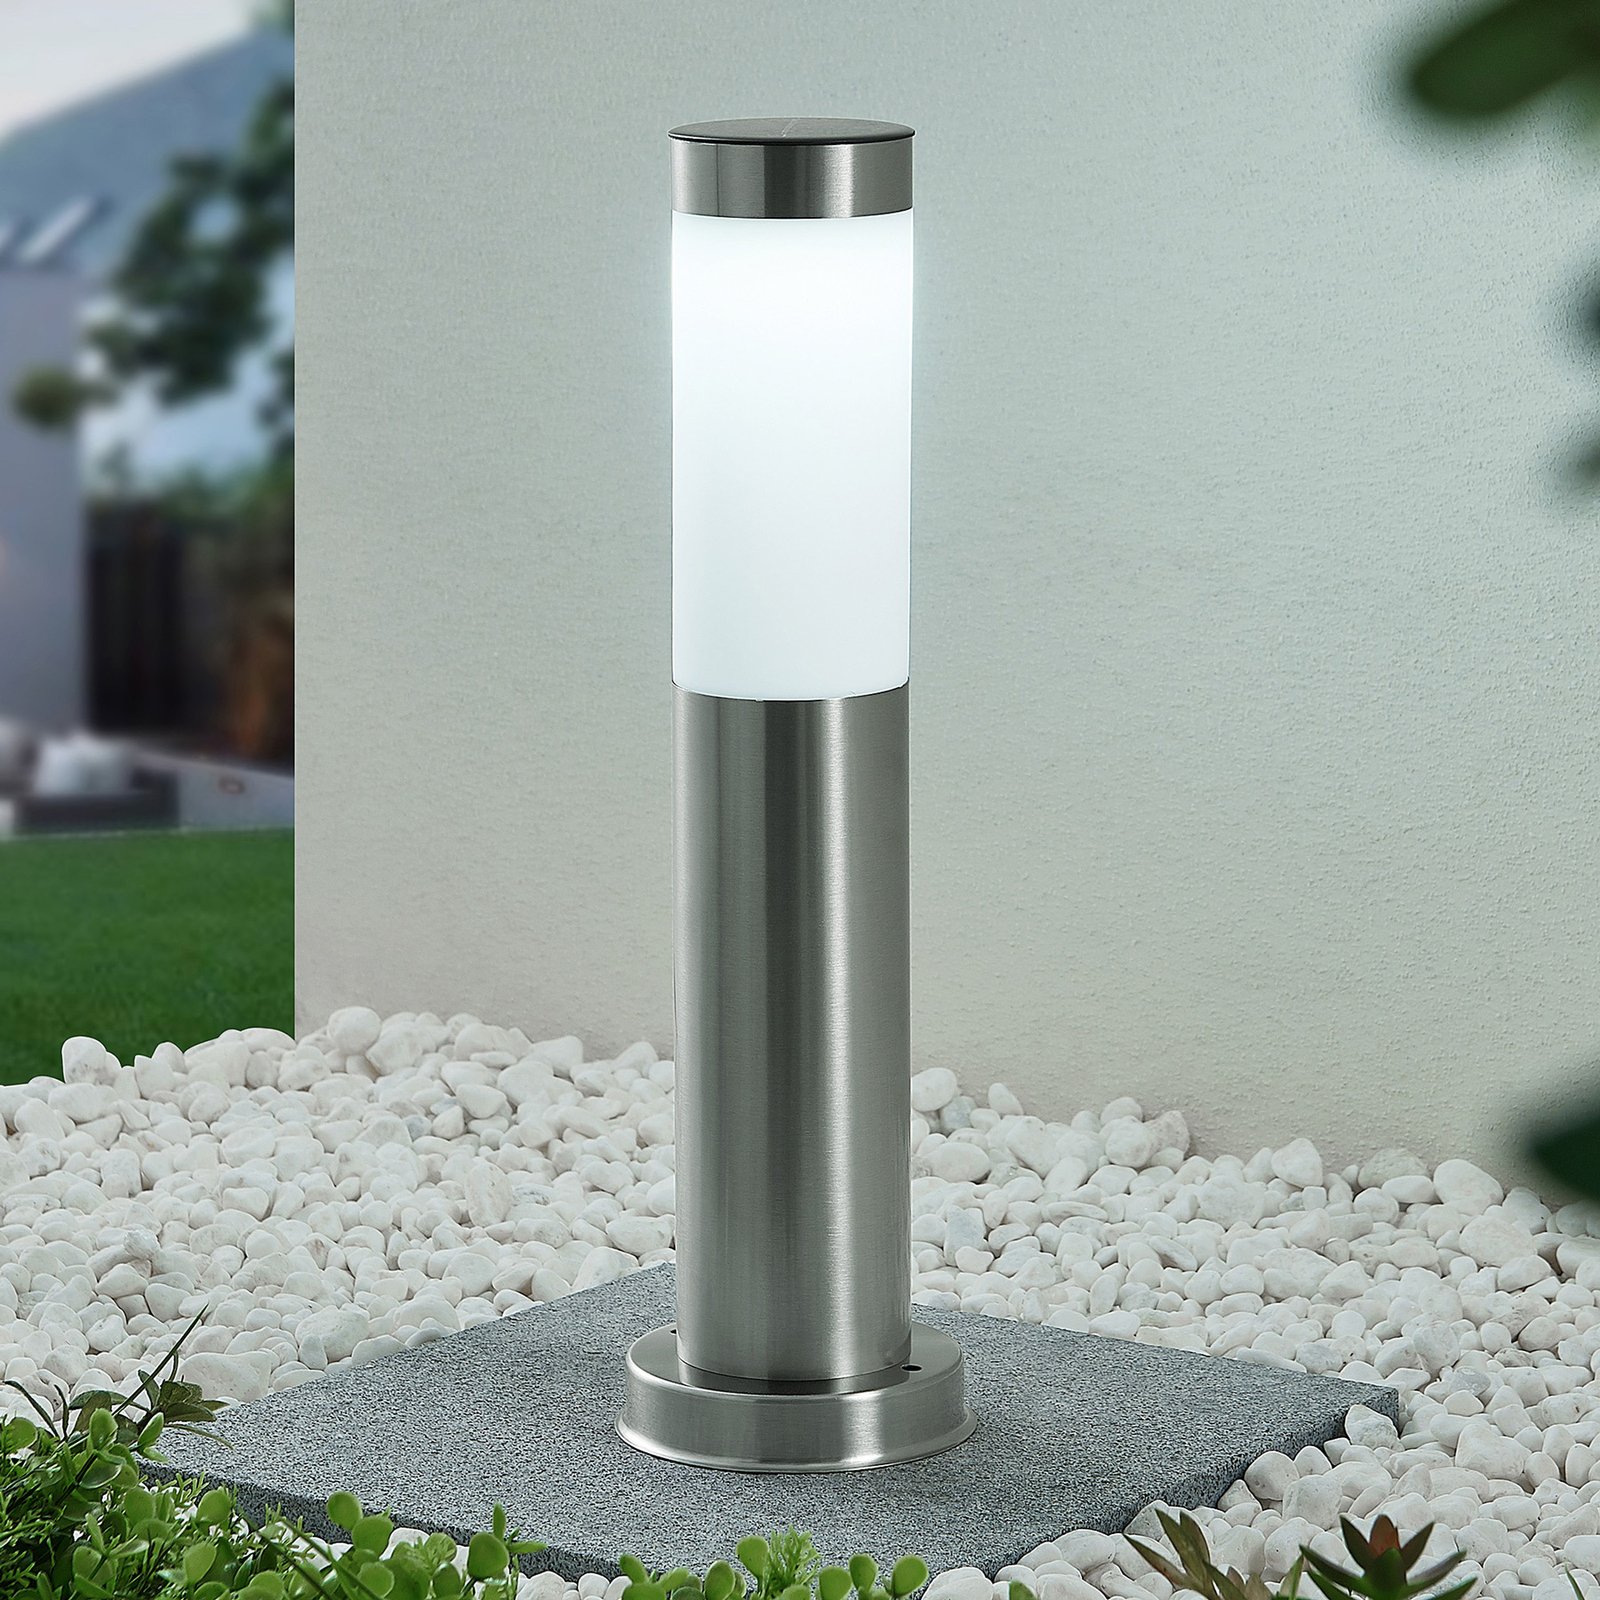 Lindby Sirita lampe pour socle solaire LED, inox